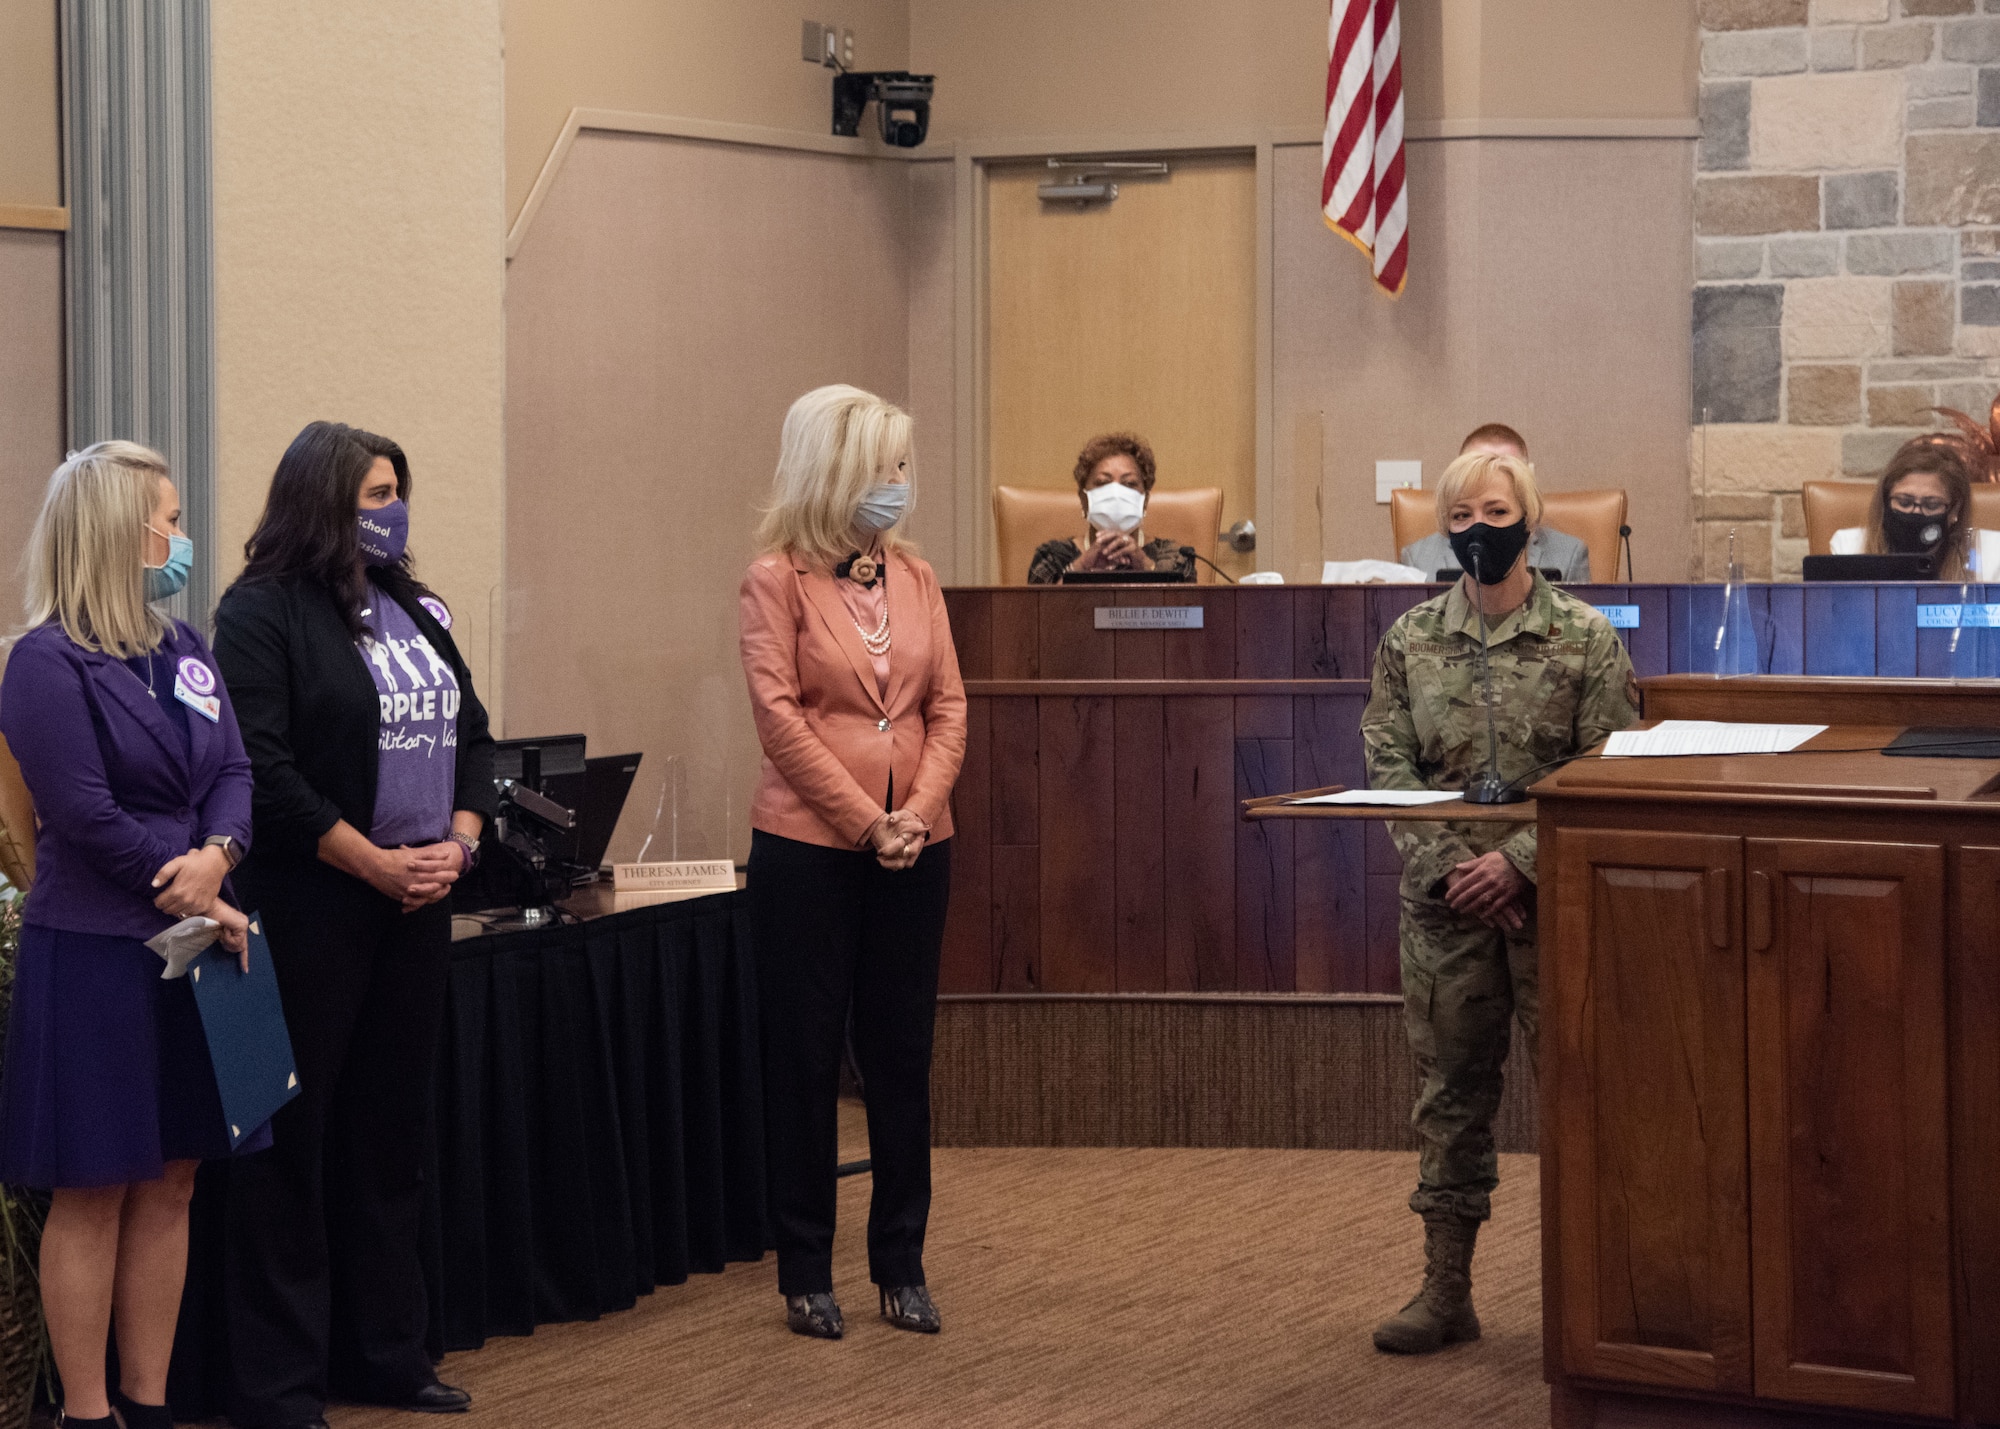 Chief Master Sgt. Casy Boomershine, 17th Training Wing command chief, provides remarks to the Mayor of San Angelo, Brenda Gunter, center, and the City Council at the proclamation singing event for the Month of the Military Child, during a monthly City Council meeting, April 6, 2021, at the McNease Convention Center in San Angelo, Texas. During the event, Gunter, proclaimed a city-wide recognition of April as the Month of the Military Child. (U.S. Air Force photo by Staff Sgt. Tyrell Hall)